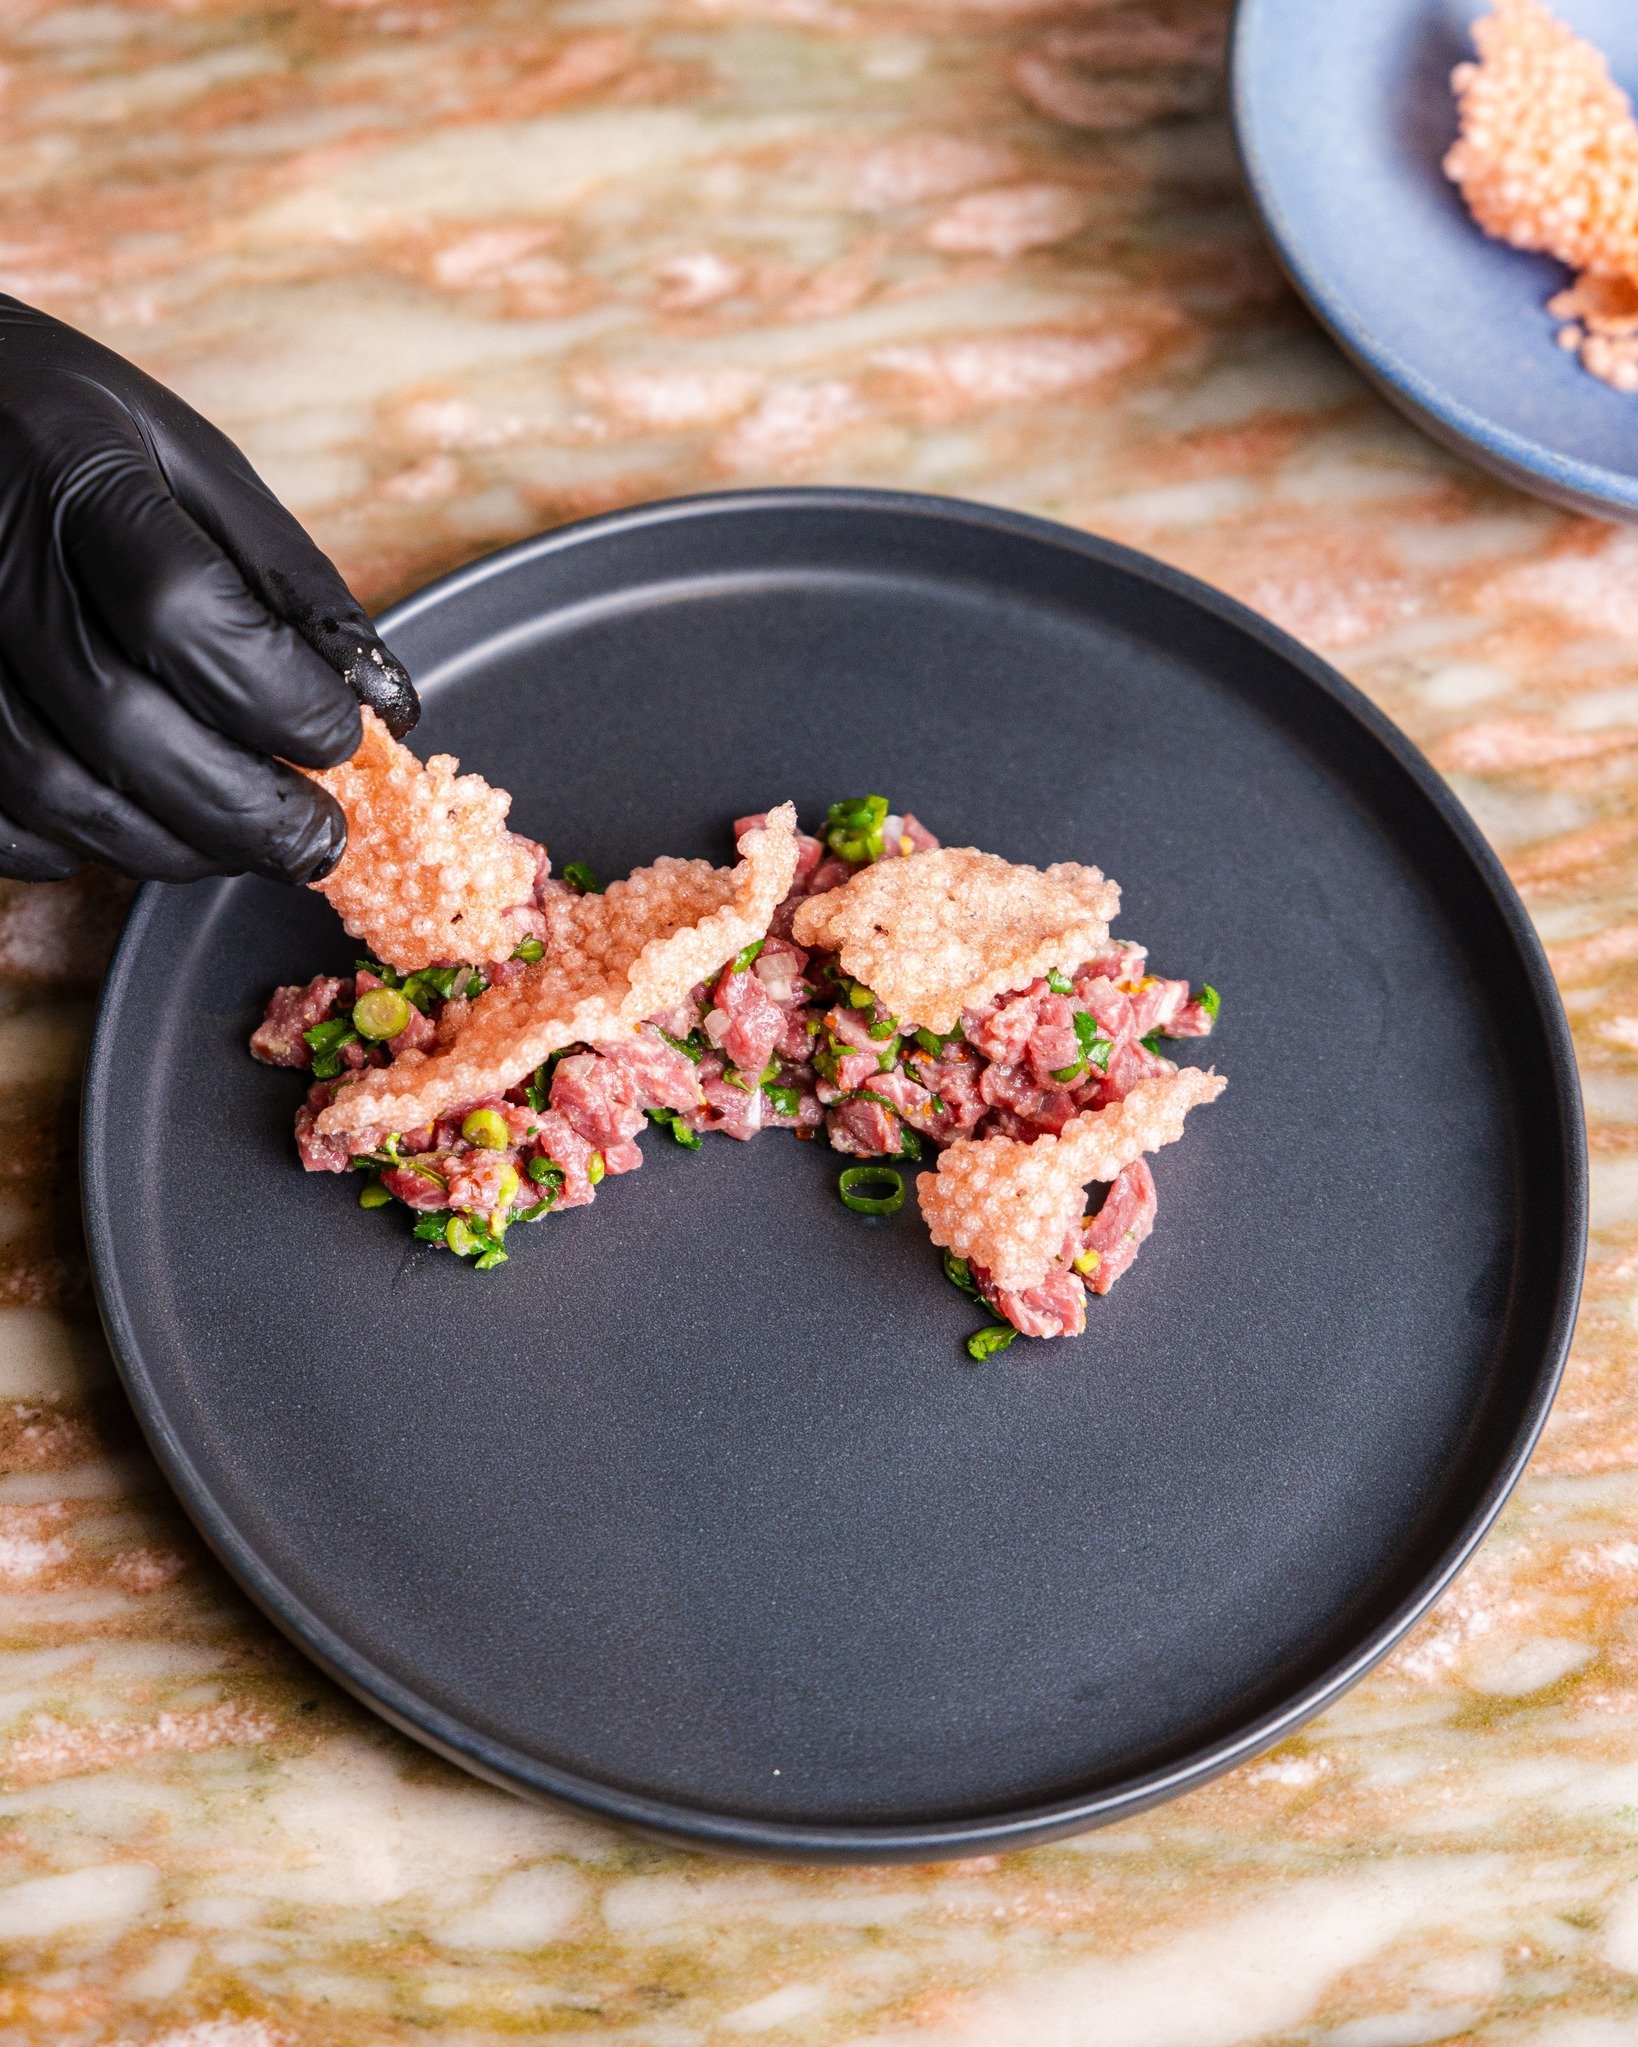 Introducing the latest addition to our menu: Beef Sar Jihn! 

A gluten free delight, this is a Thai style beef tartare served with sago crackers.

#thecharlie 

#sydneyfood #sydneybar #glebefood #glebebar #sydneyfood #glebefood #tartare #gf #glutenfr